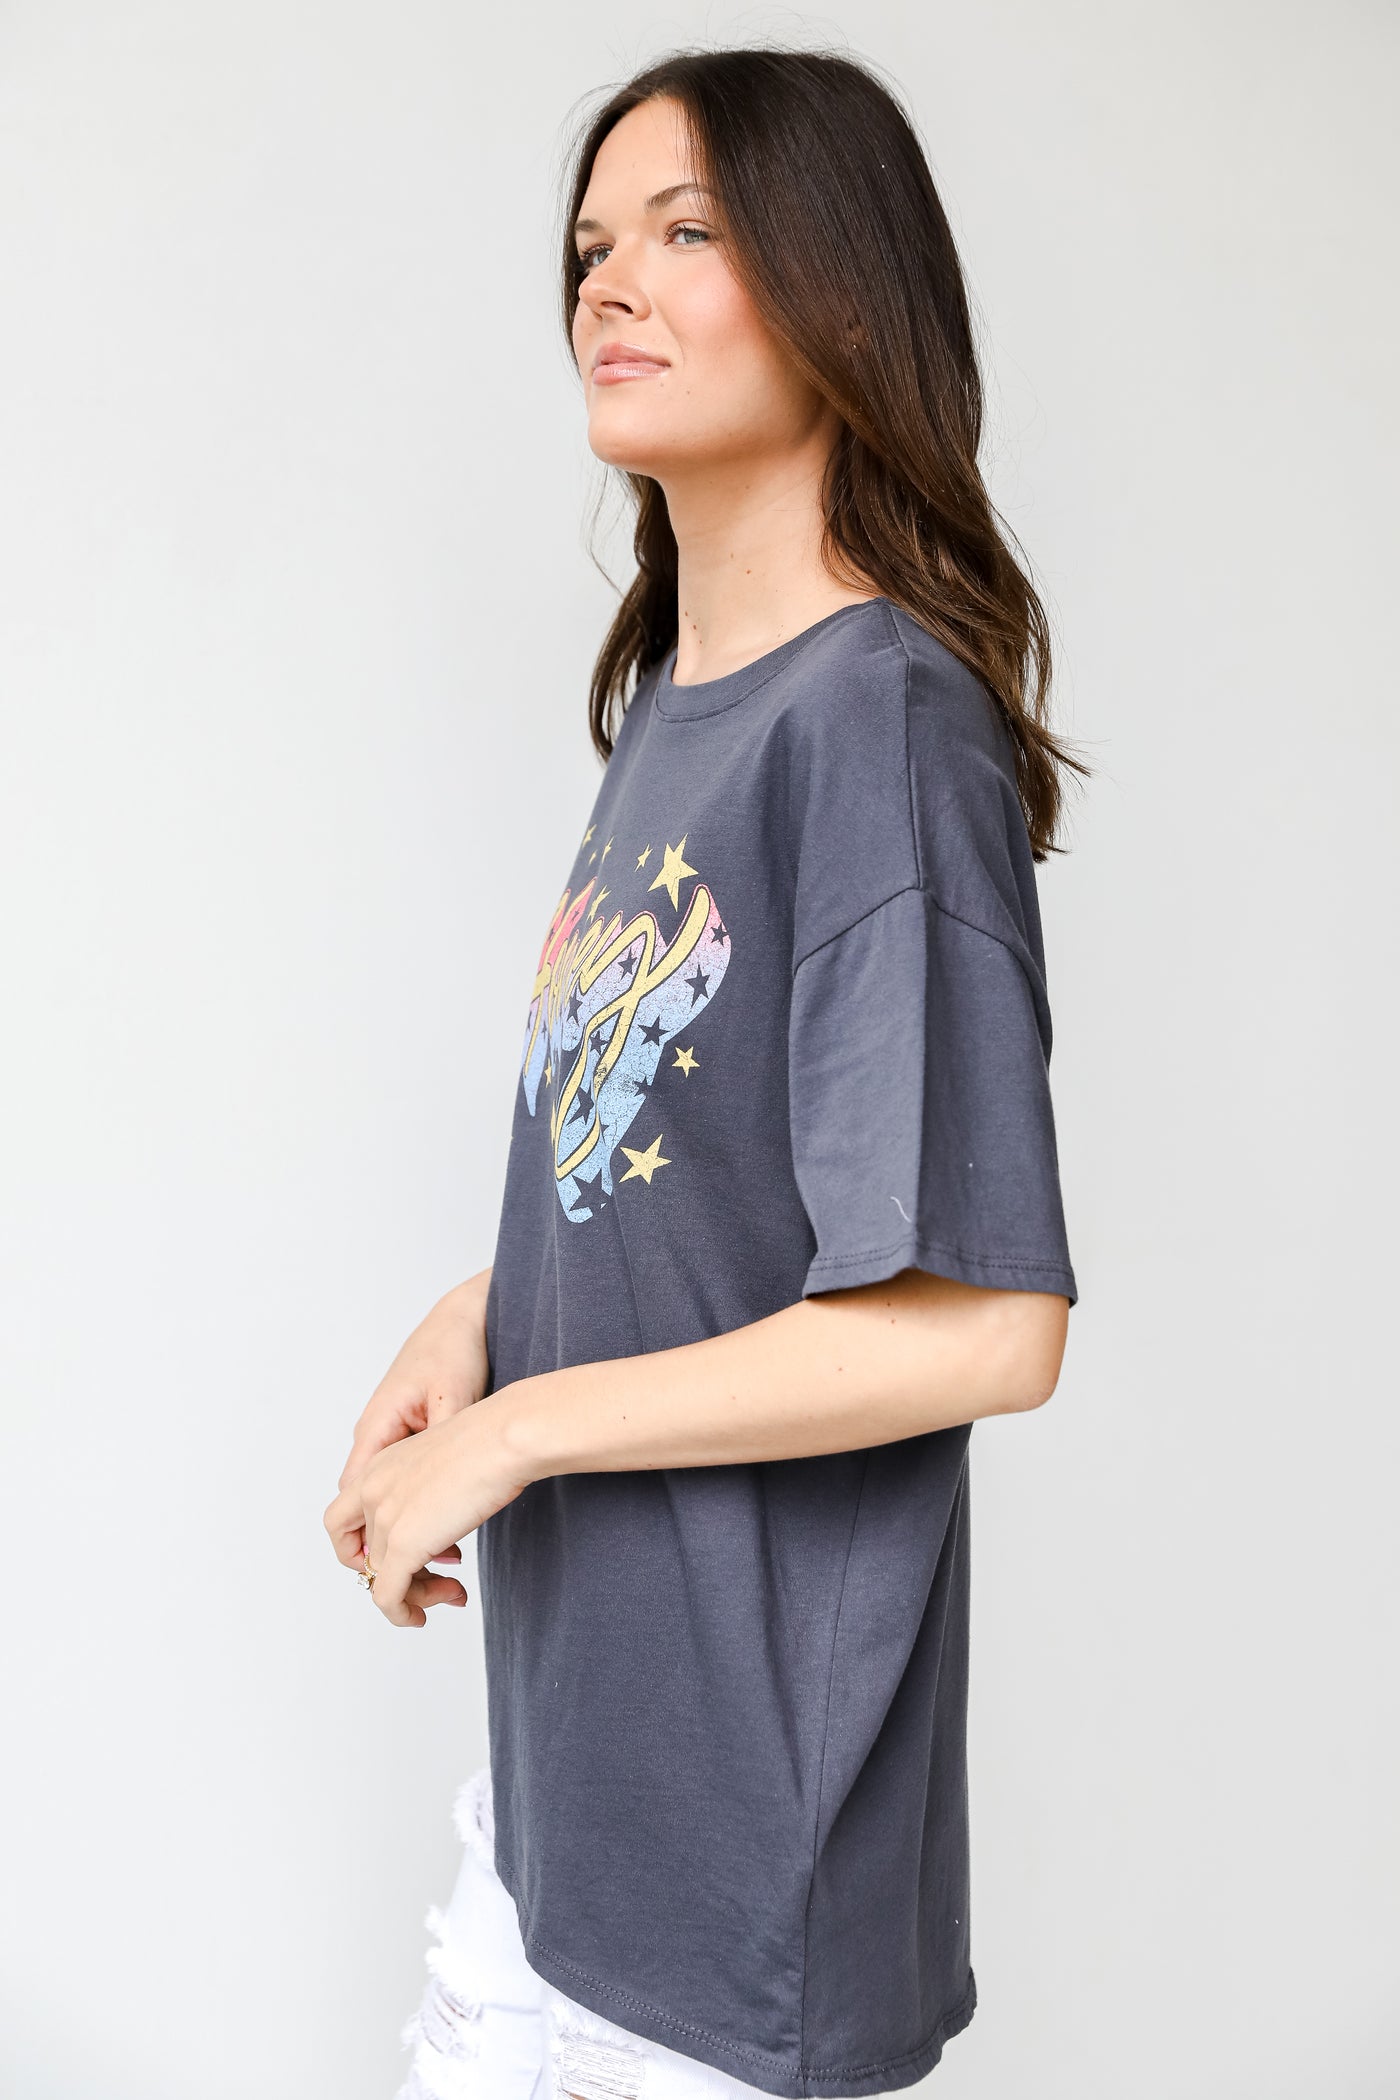 Honey Star Graphic Tee side view